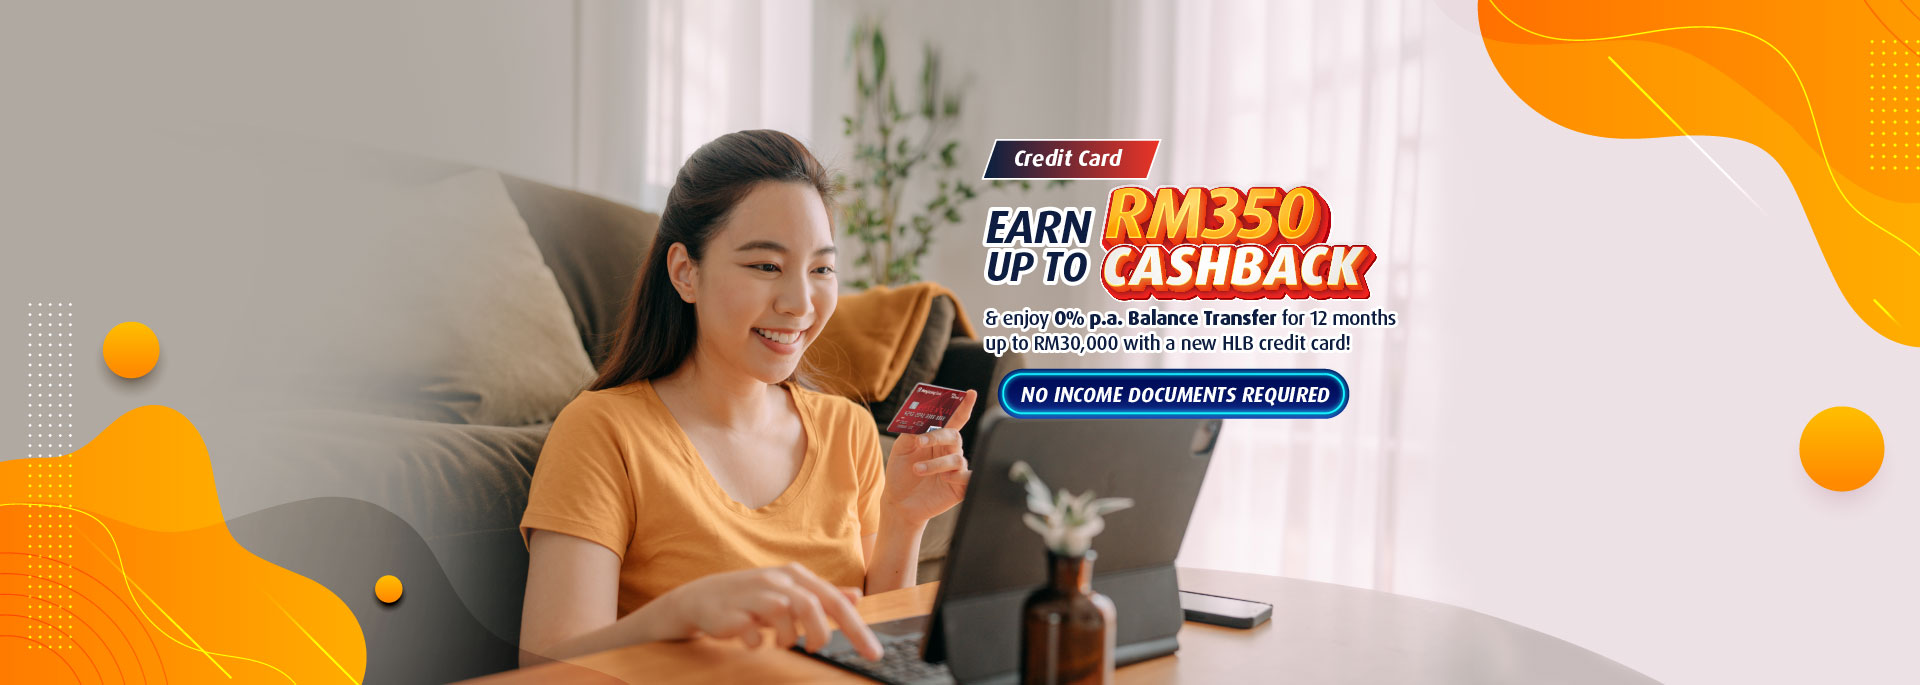 Apply for a new HLB Credit Card without income documents and enjoy up to RM350 Cashback & 0% p.a.